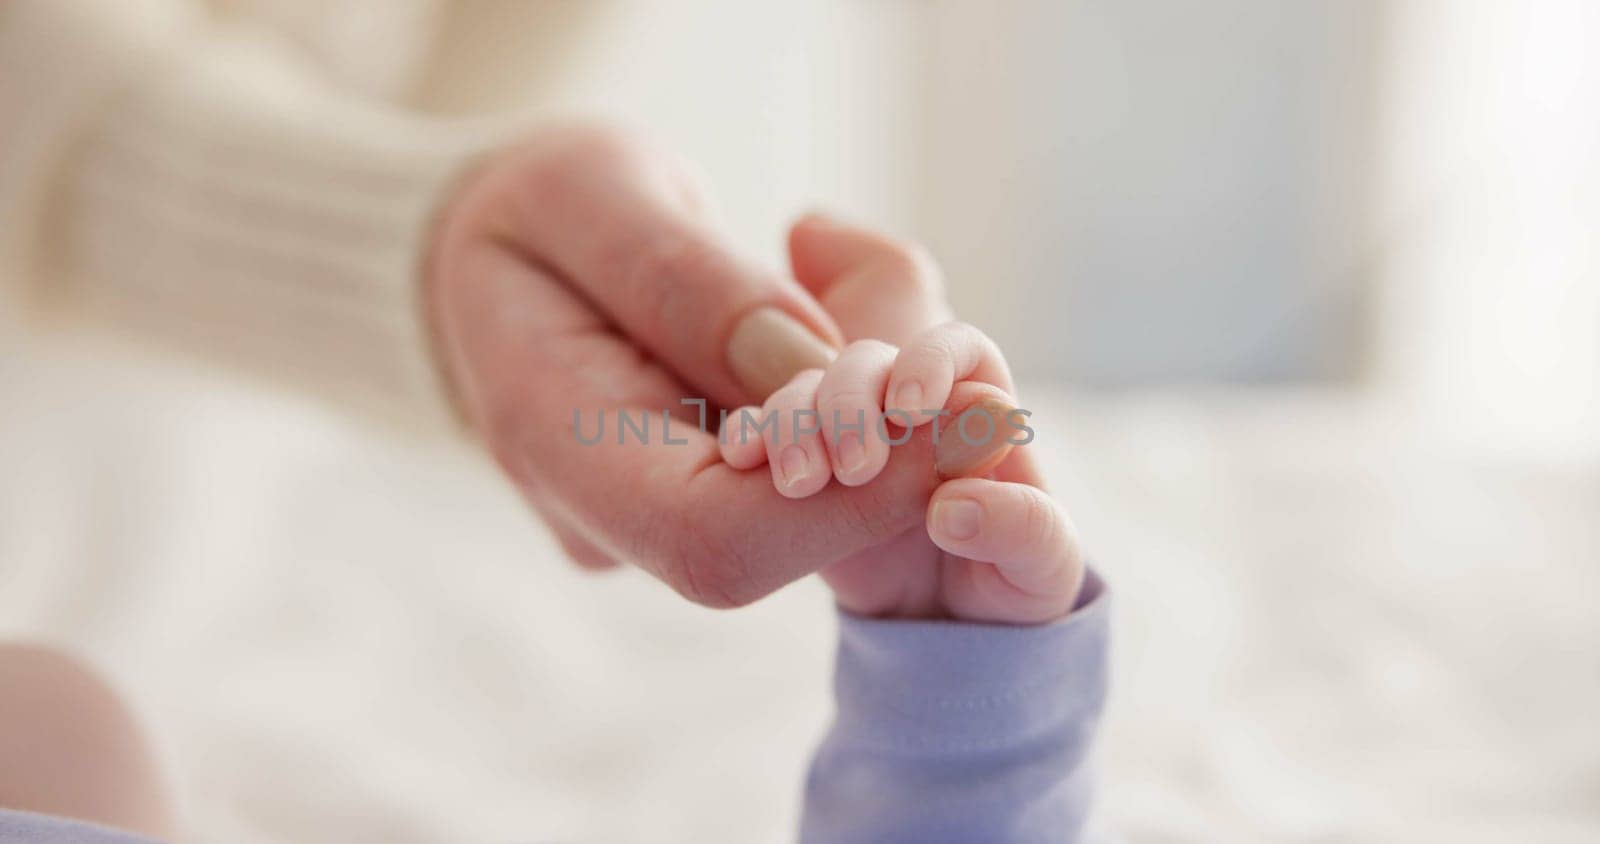 Sleeping, family and holding hands with baby on bed for bonding, love and relationship with infant. Adorable, care and closeup of parent with newborn for support, dreaming and protection at home by YuriArcurs